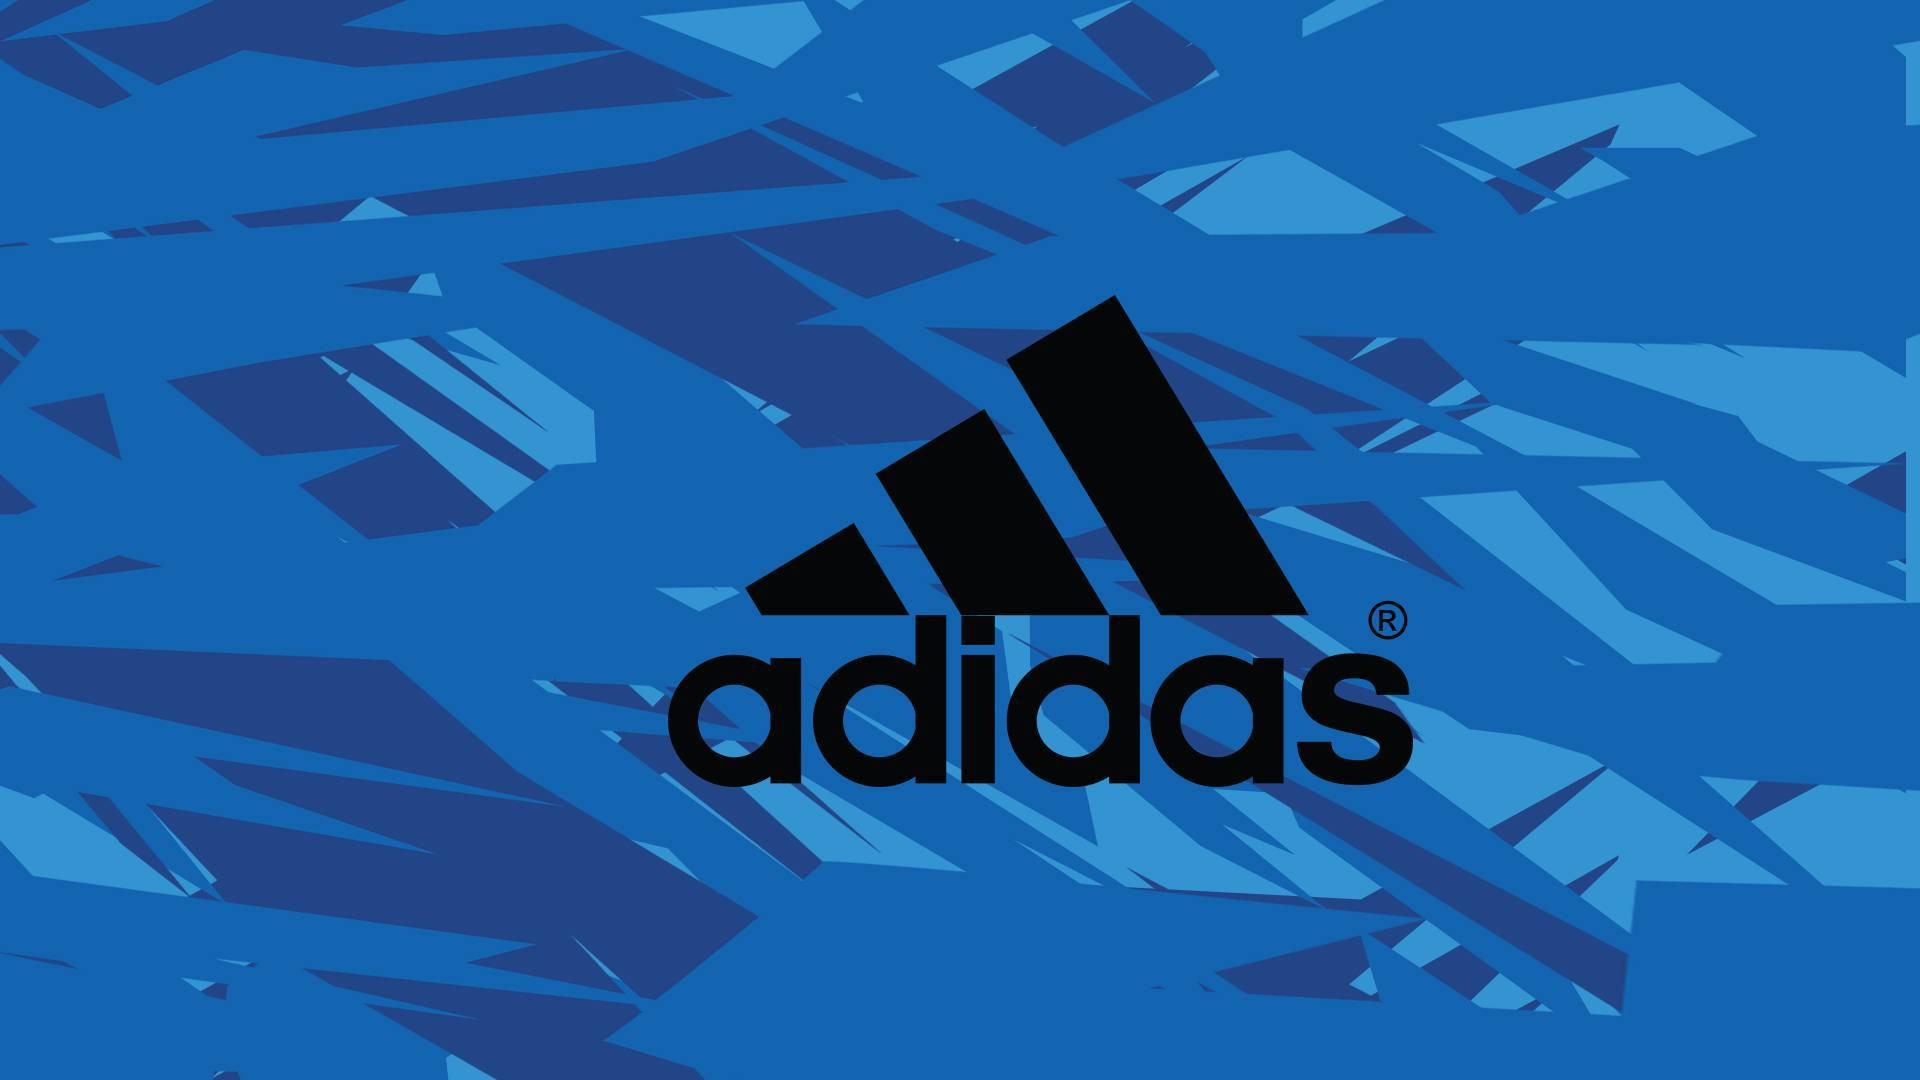 Desktop Wallpaper Adidas with high-resolution 1920x1080 pixel. You can use this wallpaper for your Windows and Mac OS computers as well as your Android and iPhone smartphones